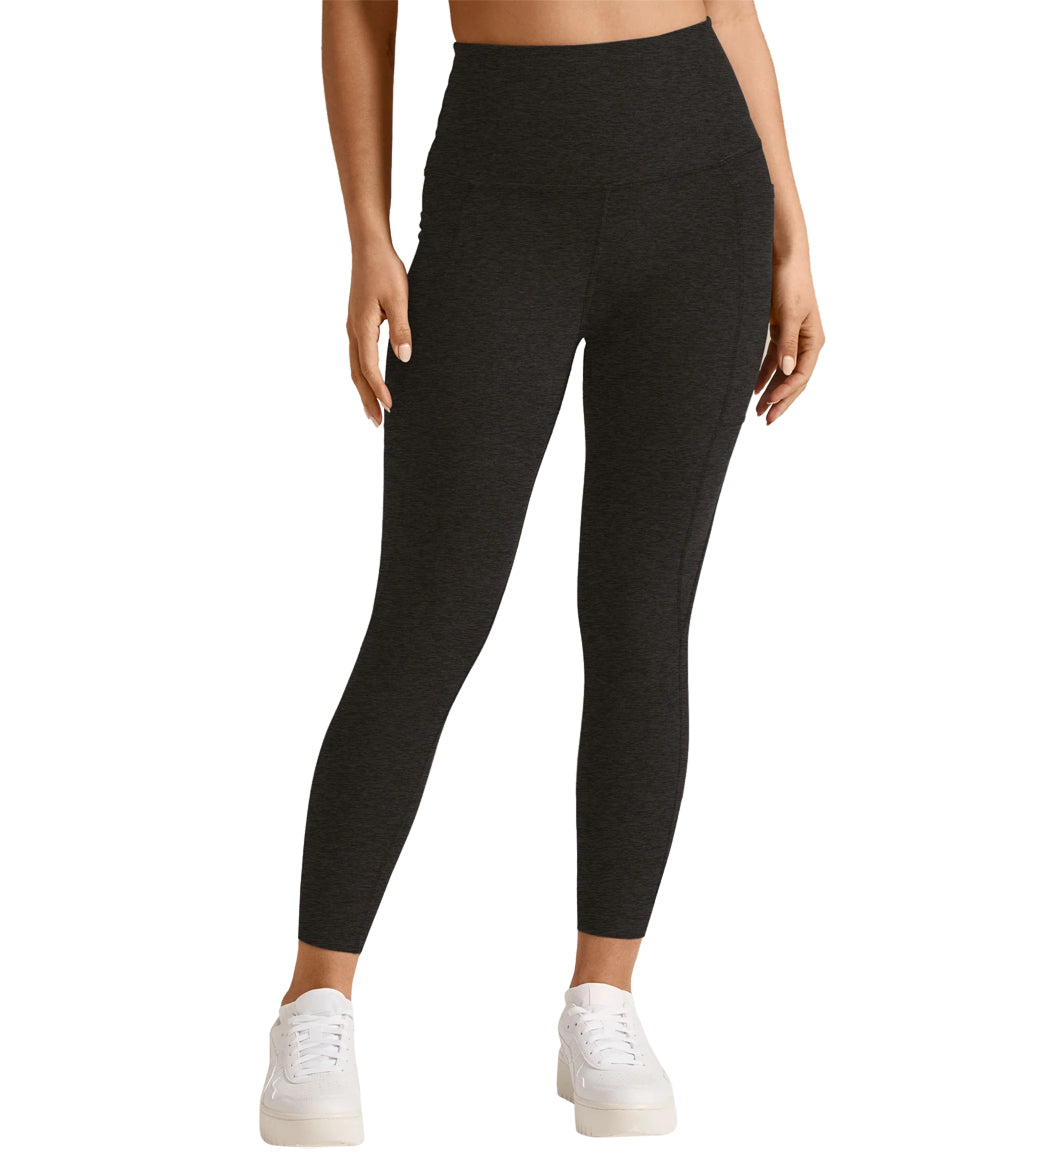 https://www.alloyapparesl.shop/wp-content/uploads/1706/56/only-38-80-usd-for-beyond-yoga-spacedye-out-of-pocket-high-waisted-capri-legging-darkest-night-online-at-the-shop_0.jpg